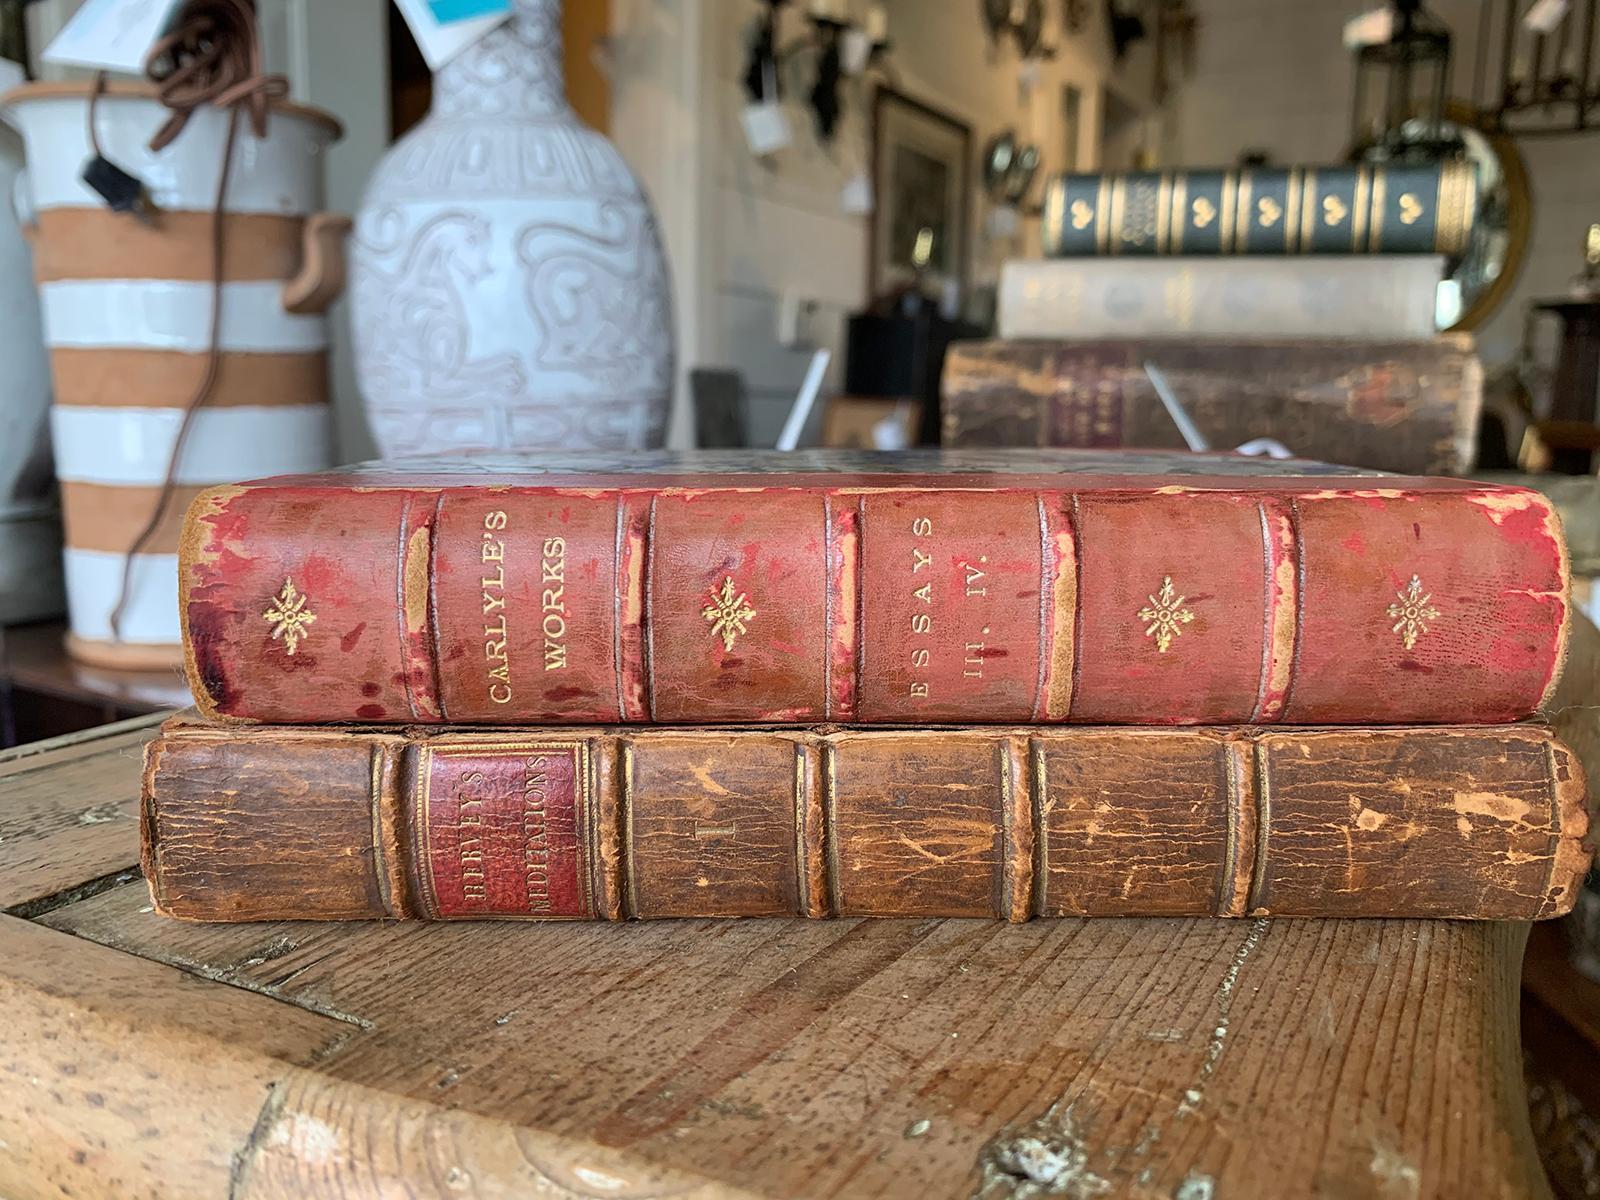 Assembled pair of 18th-19th century English leather bound books
Red: Vol III & IV of 